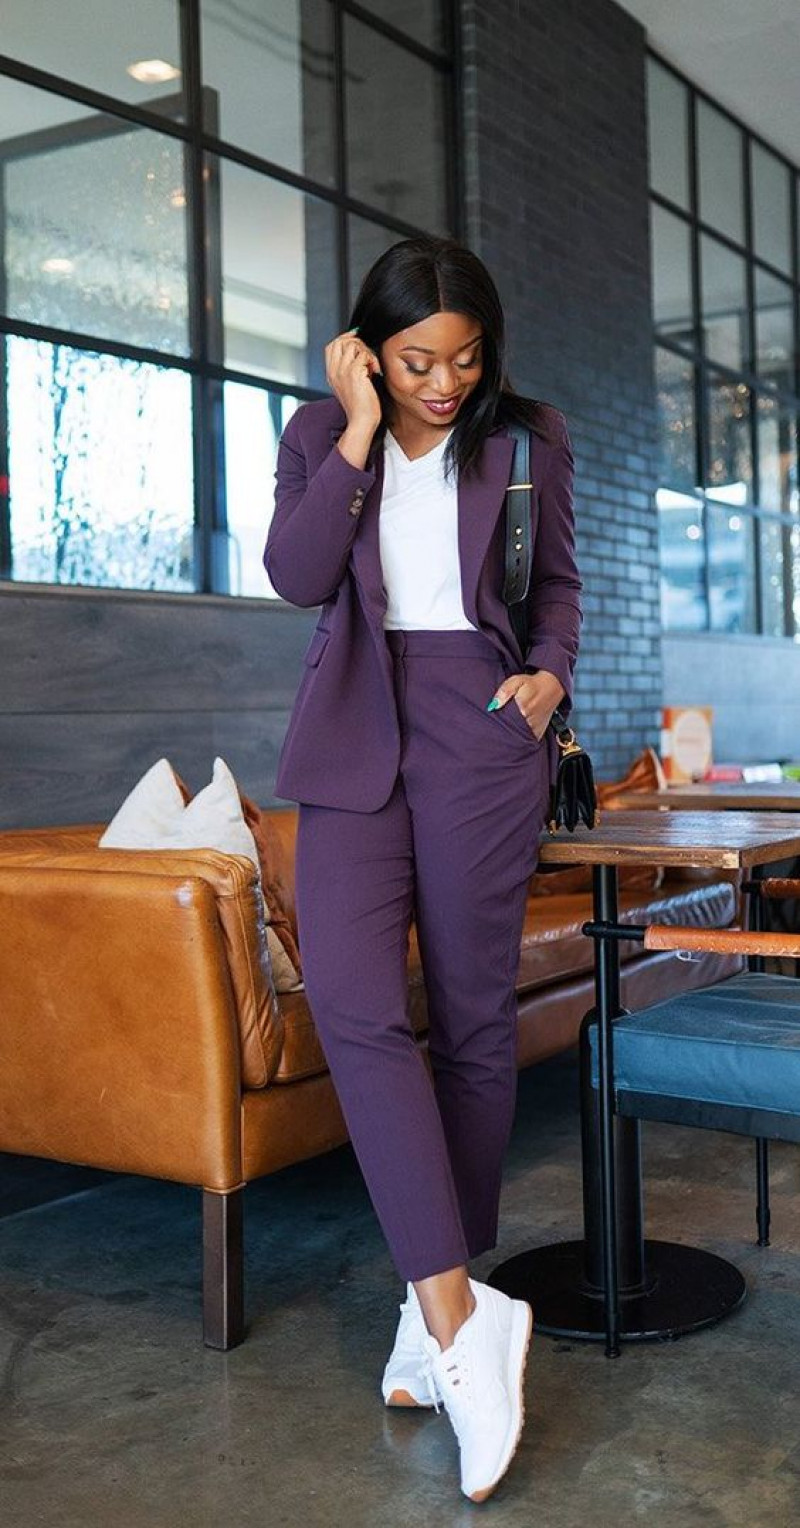 ladies formal wear with sneakers, women's suits, women's shoe, office wear, formal wear, purple and violet casual trouser, purple and violet wool coat, white trainer